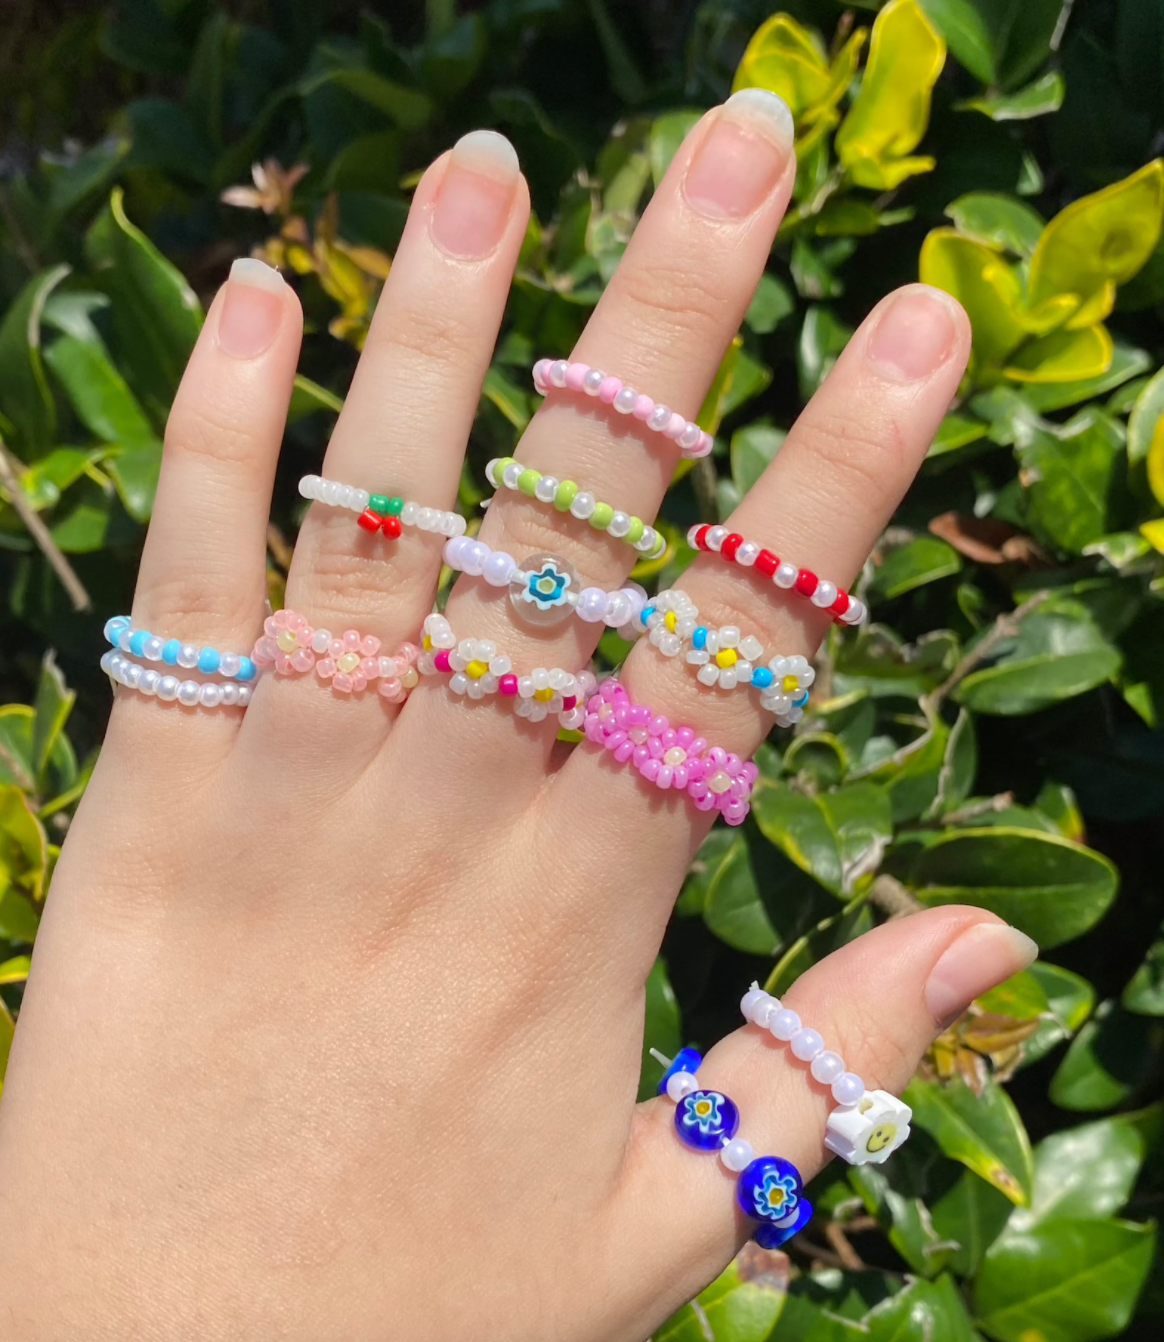 hand with a variety of colorful seed bead rings on all five fingers